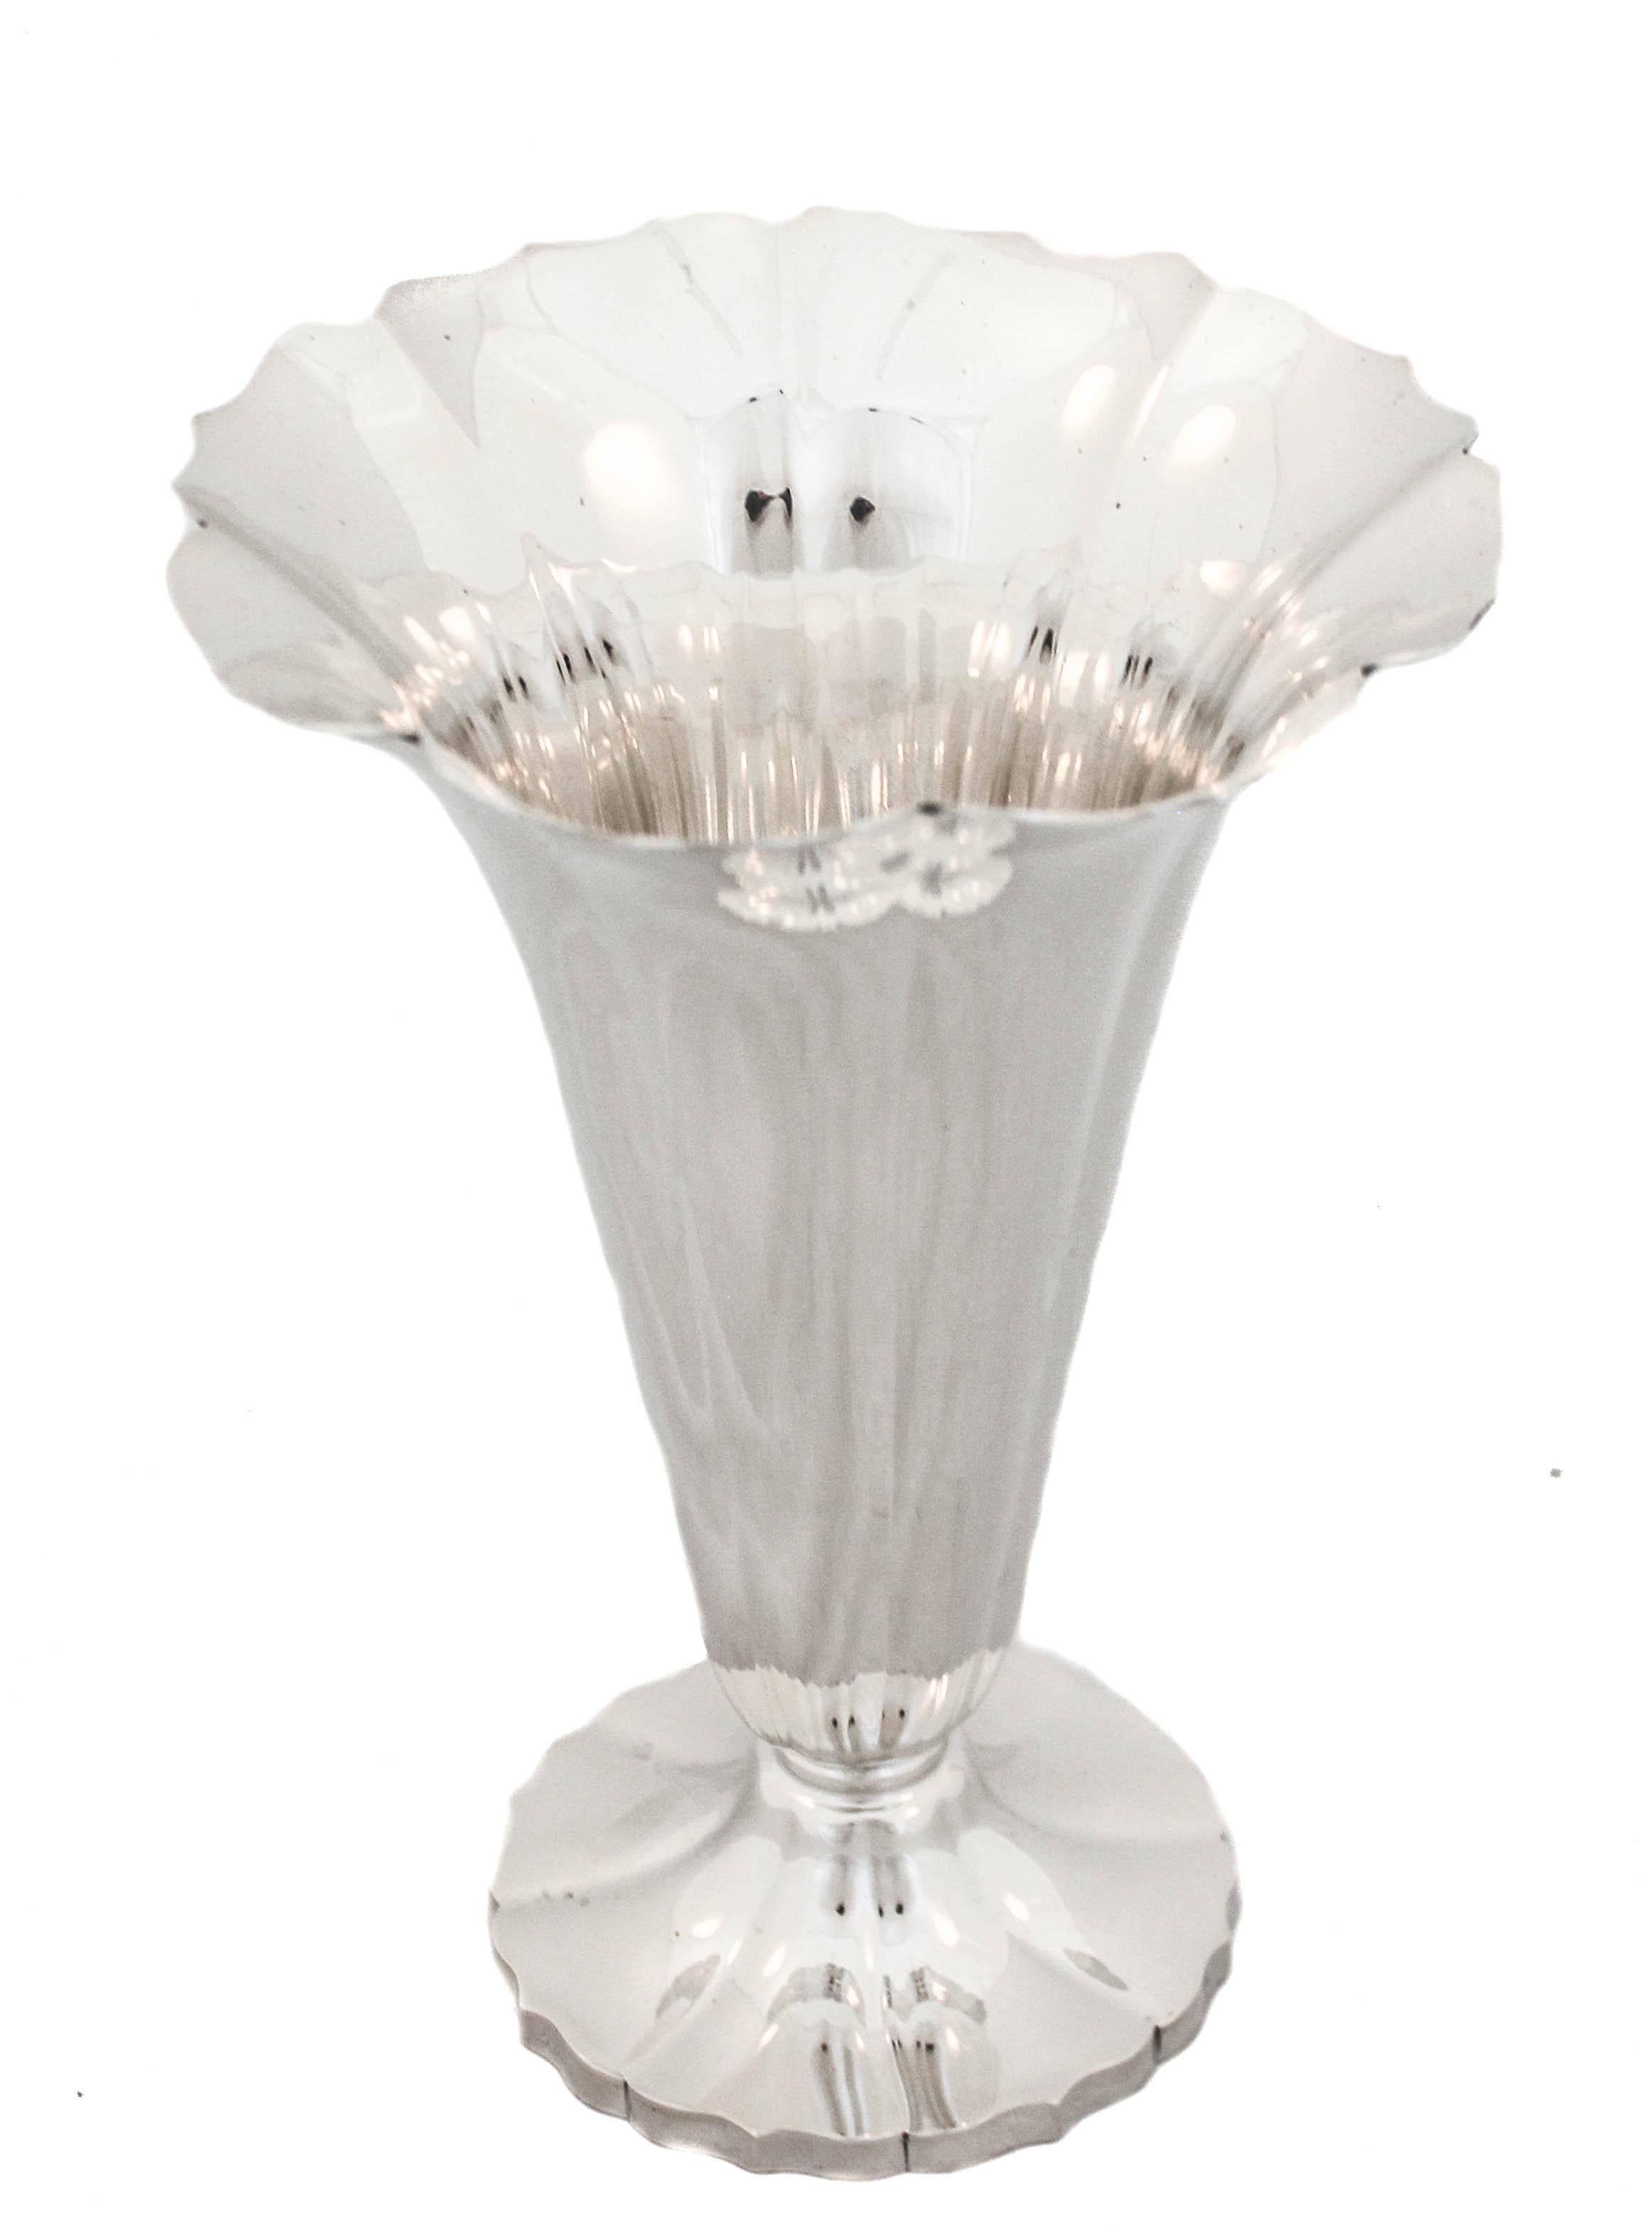 This sterling silver vase will add elegance to any room and decor. It has a scalloped rim that opens outwards mimicking a budding flower. Sleek and contemporary it can be used in a bedroom, foyer or powder room. The base is also scalloped thereby